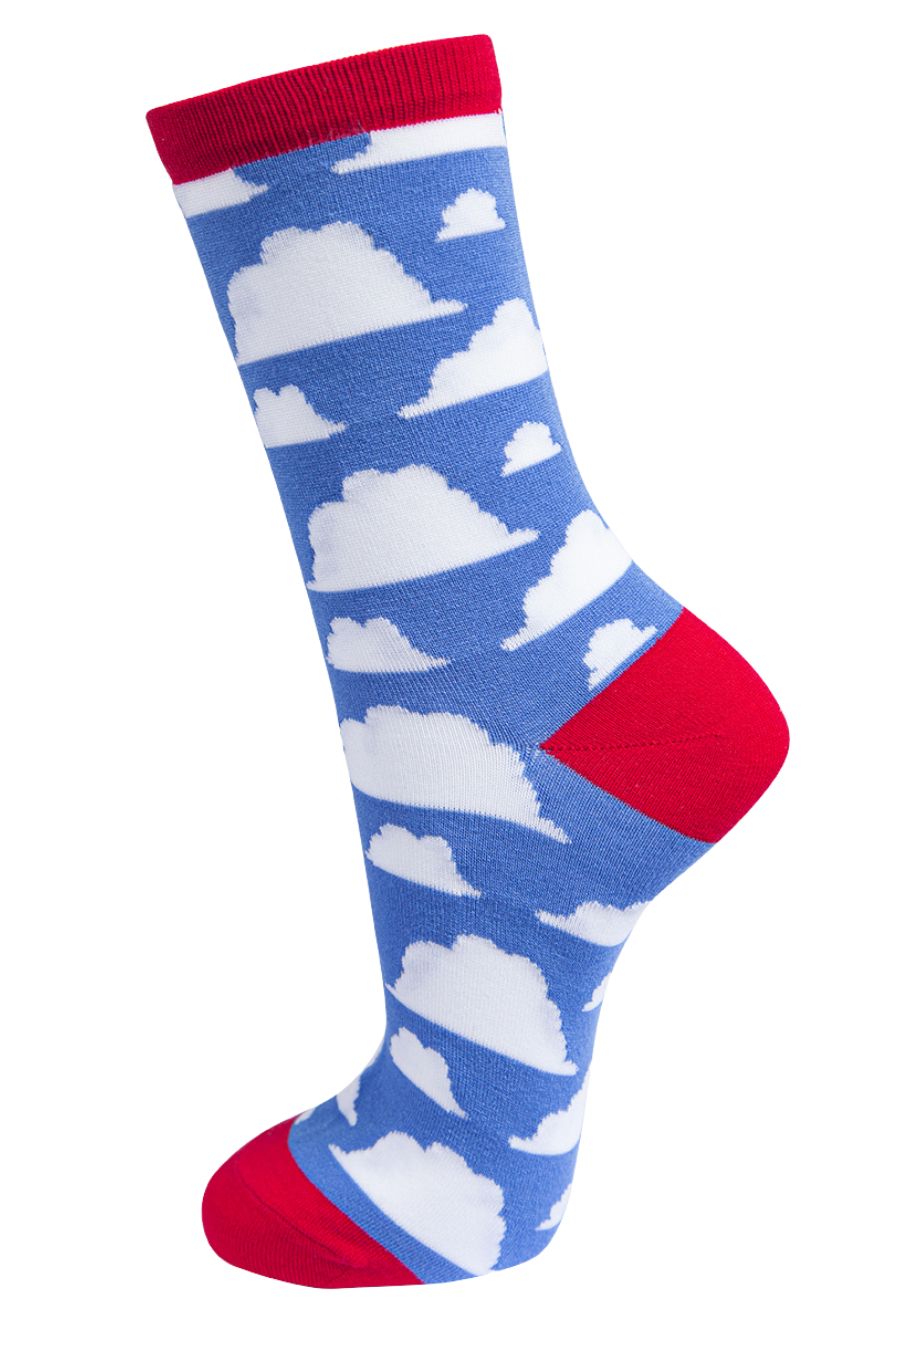 blue ankle socks, with red toe, heel and trim with an all over white cloud pattern